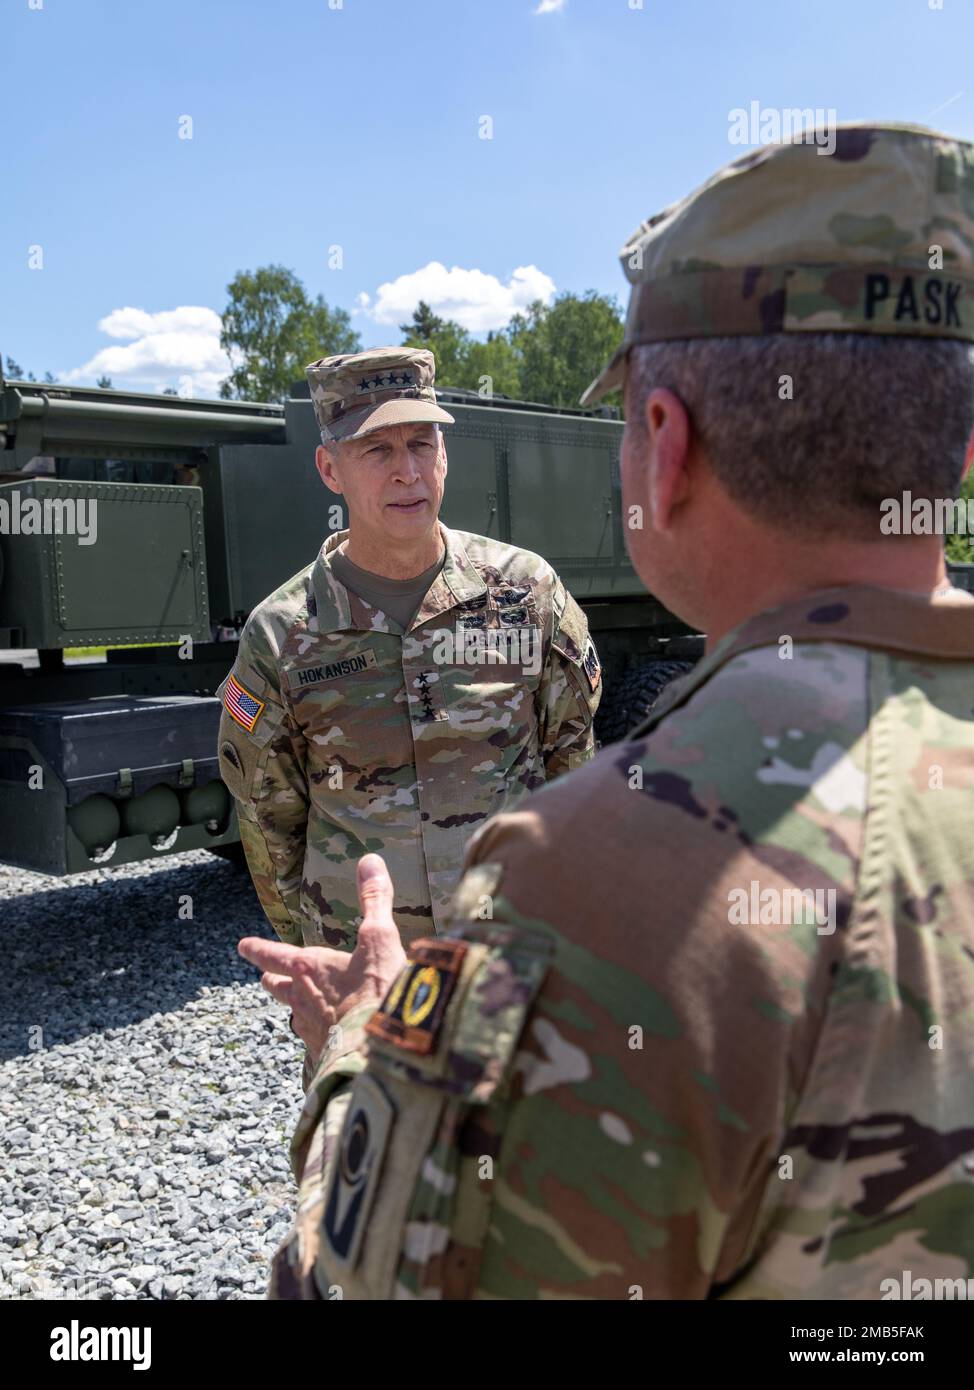 Chief of the National Guard Bureau, Gen. Daniel Hokanson, talks with Command Sgt. Maj. Jasen Pask, the Senior Enlisted Leader of Joint Multinational Training Group - Ukraine, June 12, 2022, in Grafenwoehr, Germany. Hokanson, who is touring different areas of operations throughout the european theater, stopped in Grafenwoehr Germany to see soldiers from the Florida National Guard that currently make up the JMTG-U. (Photo by Sgt. Spencer Rhodes, 53rd Infantry Brigade) Stock Photo